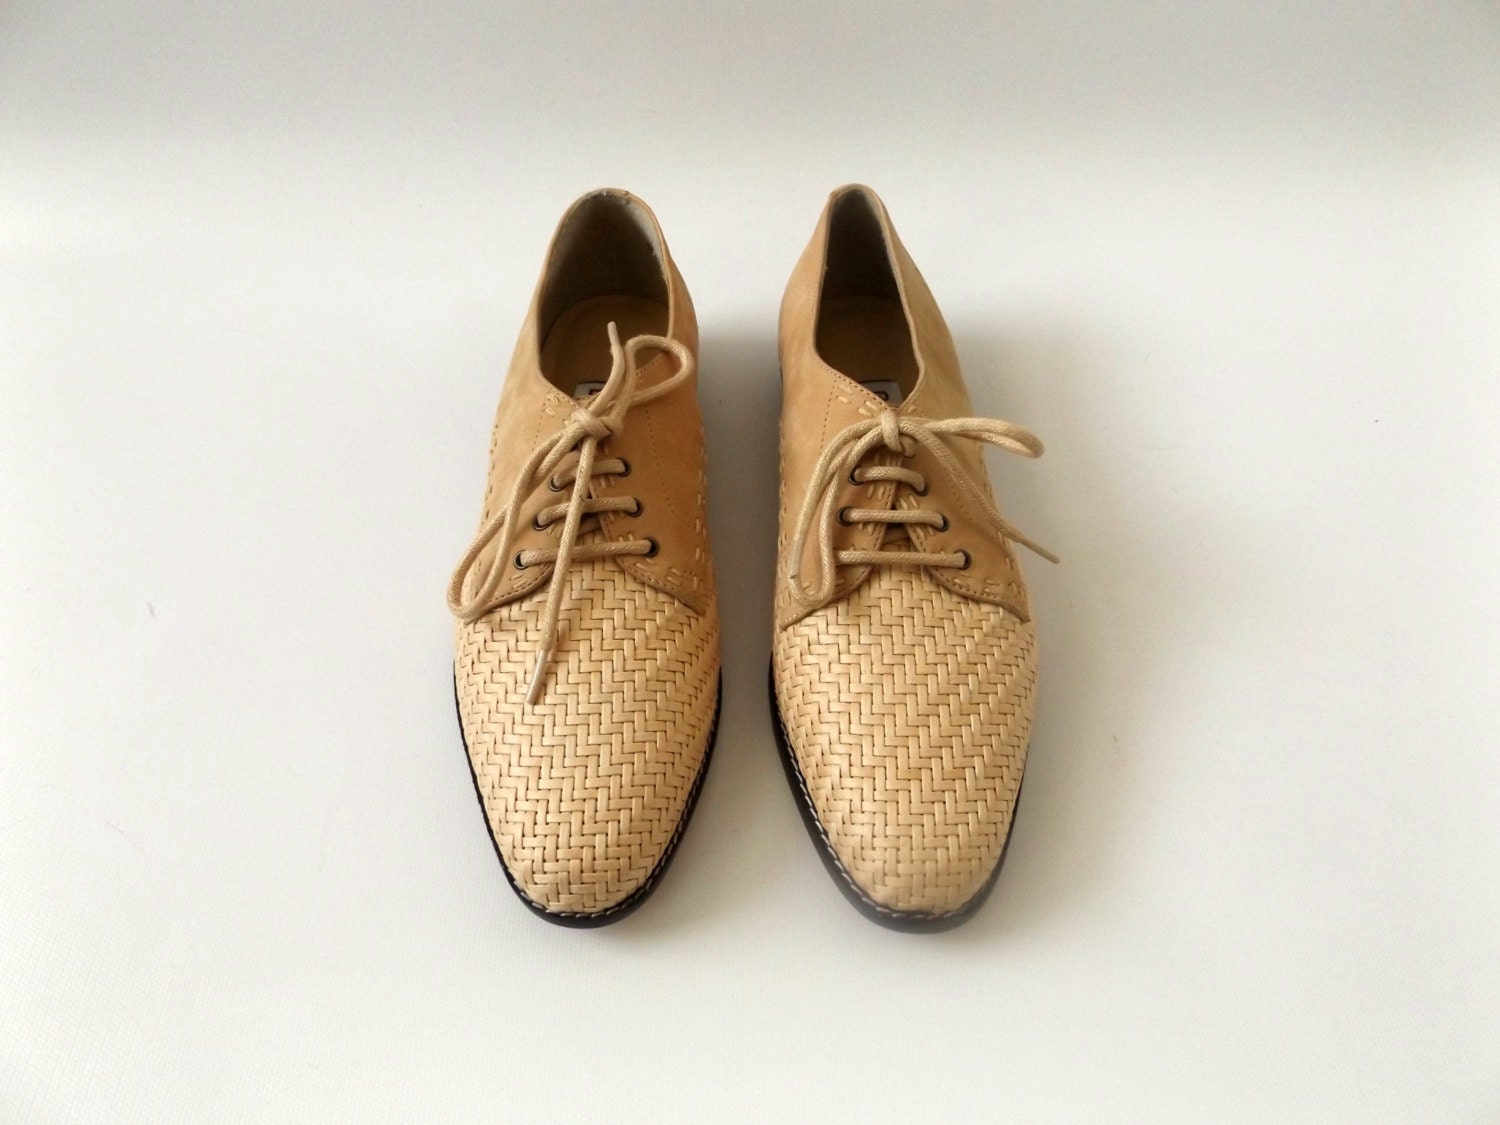 woven leather straw oxford shoes vintage 80s bandolino